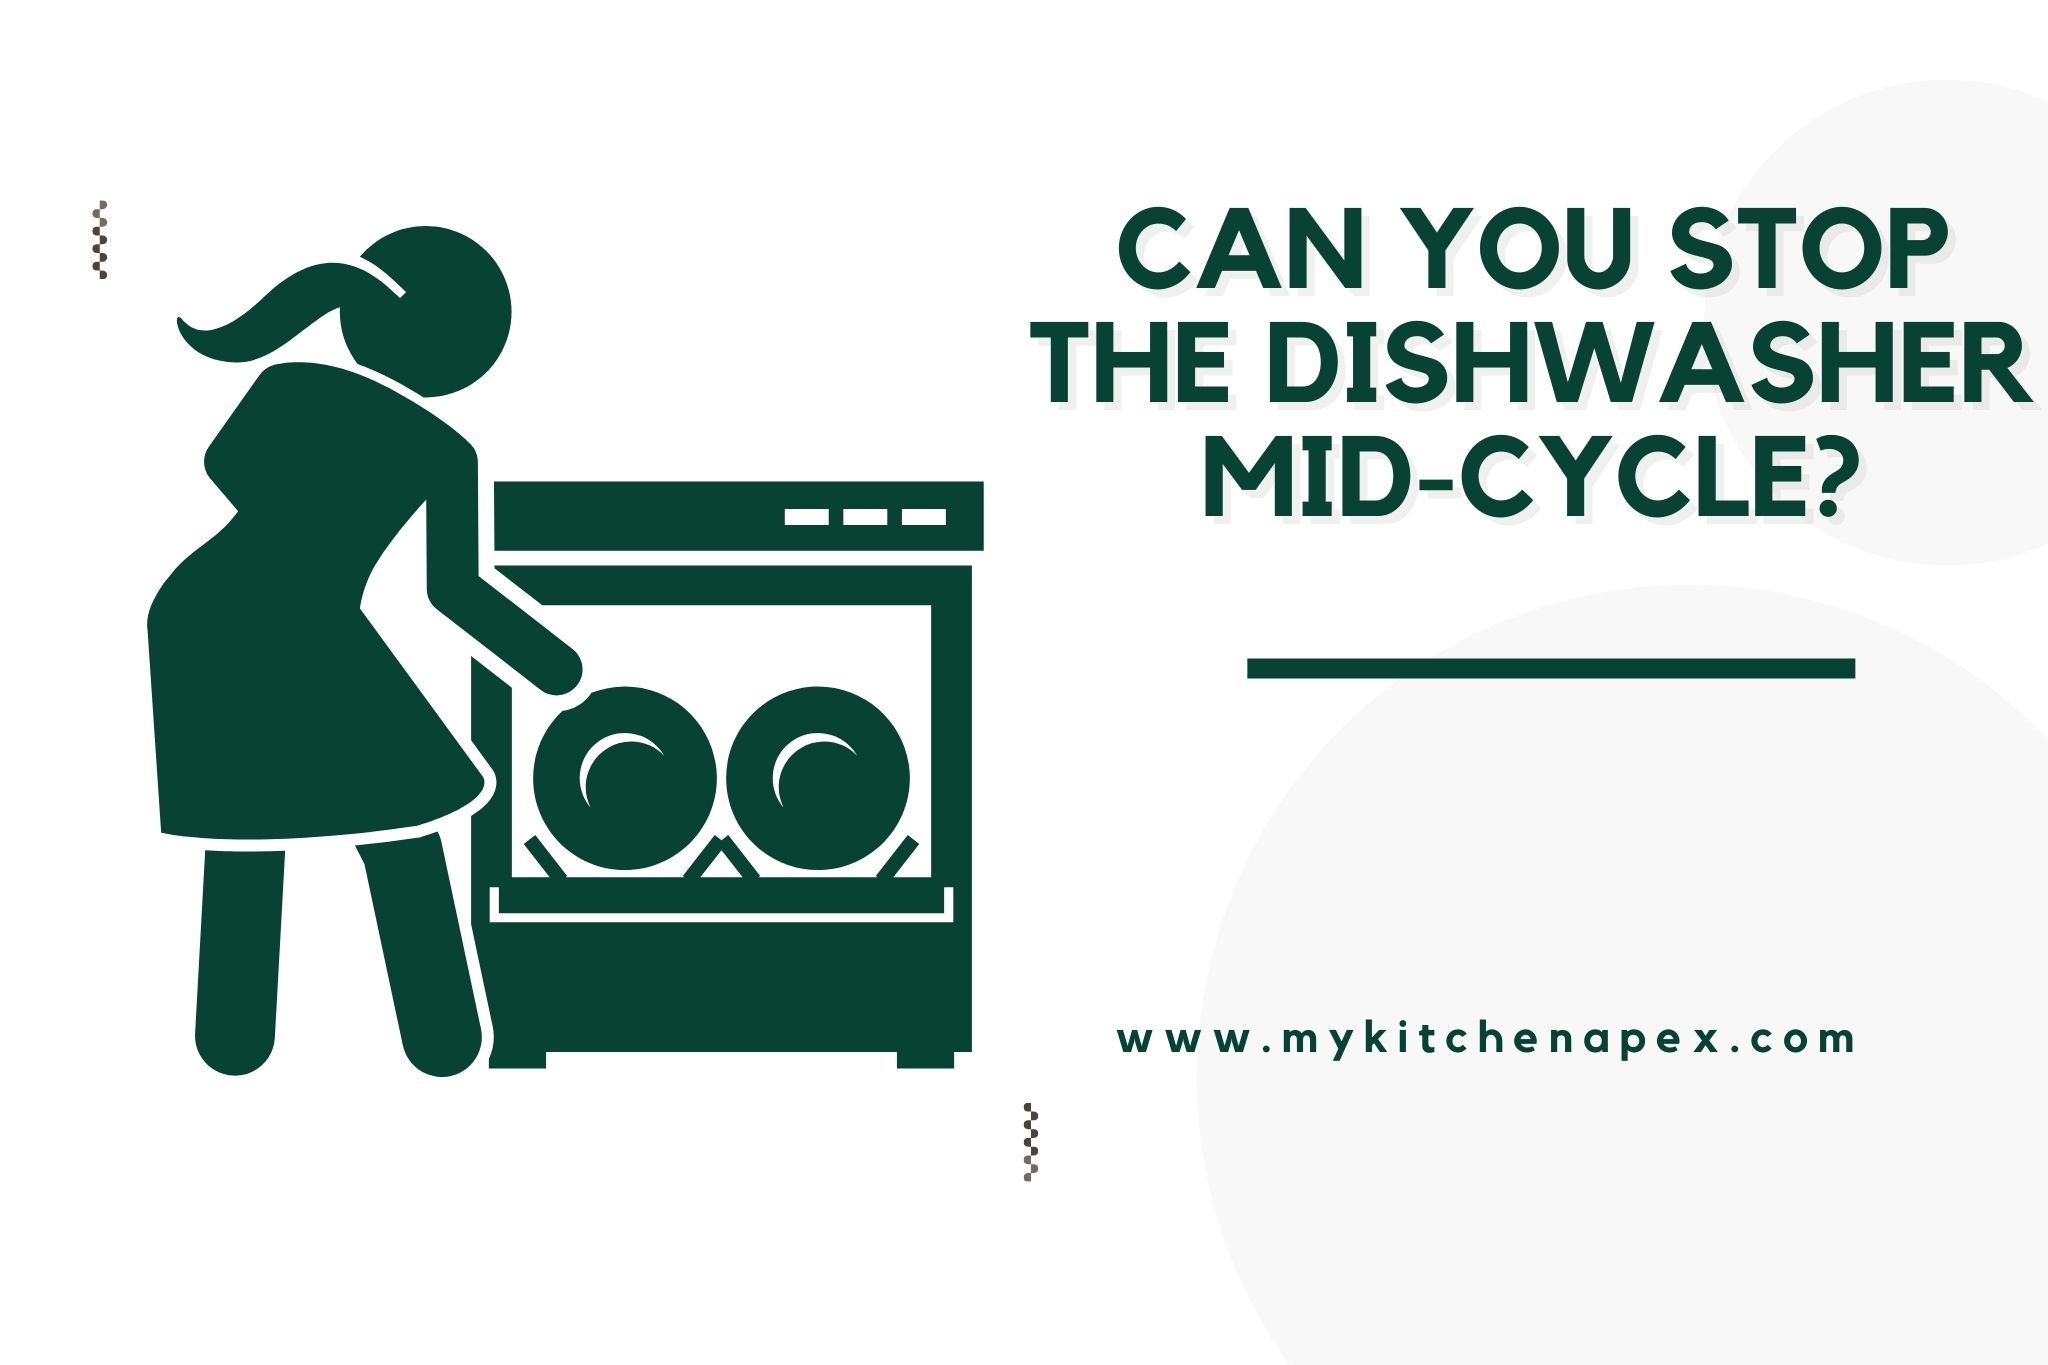 Can You Stop The Dishwasher Mid-Cycle?